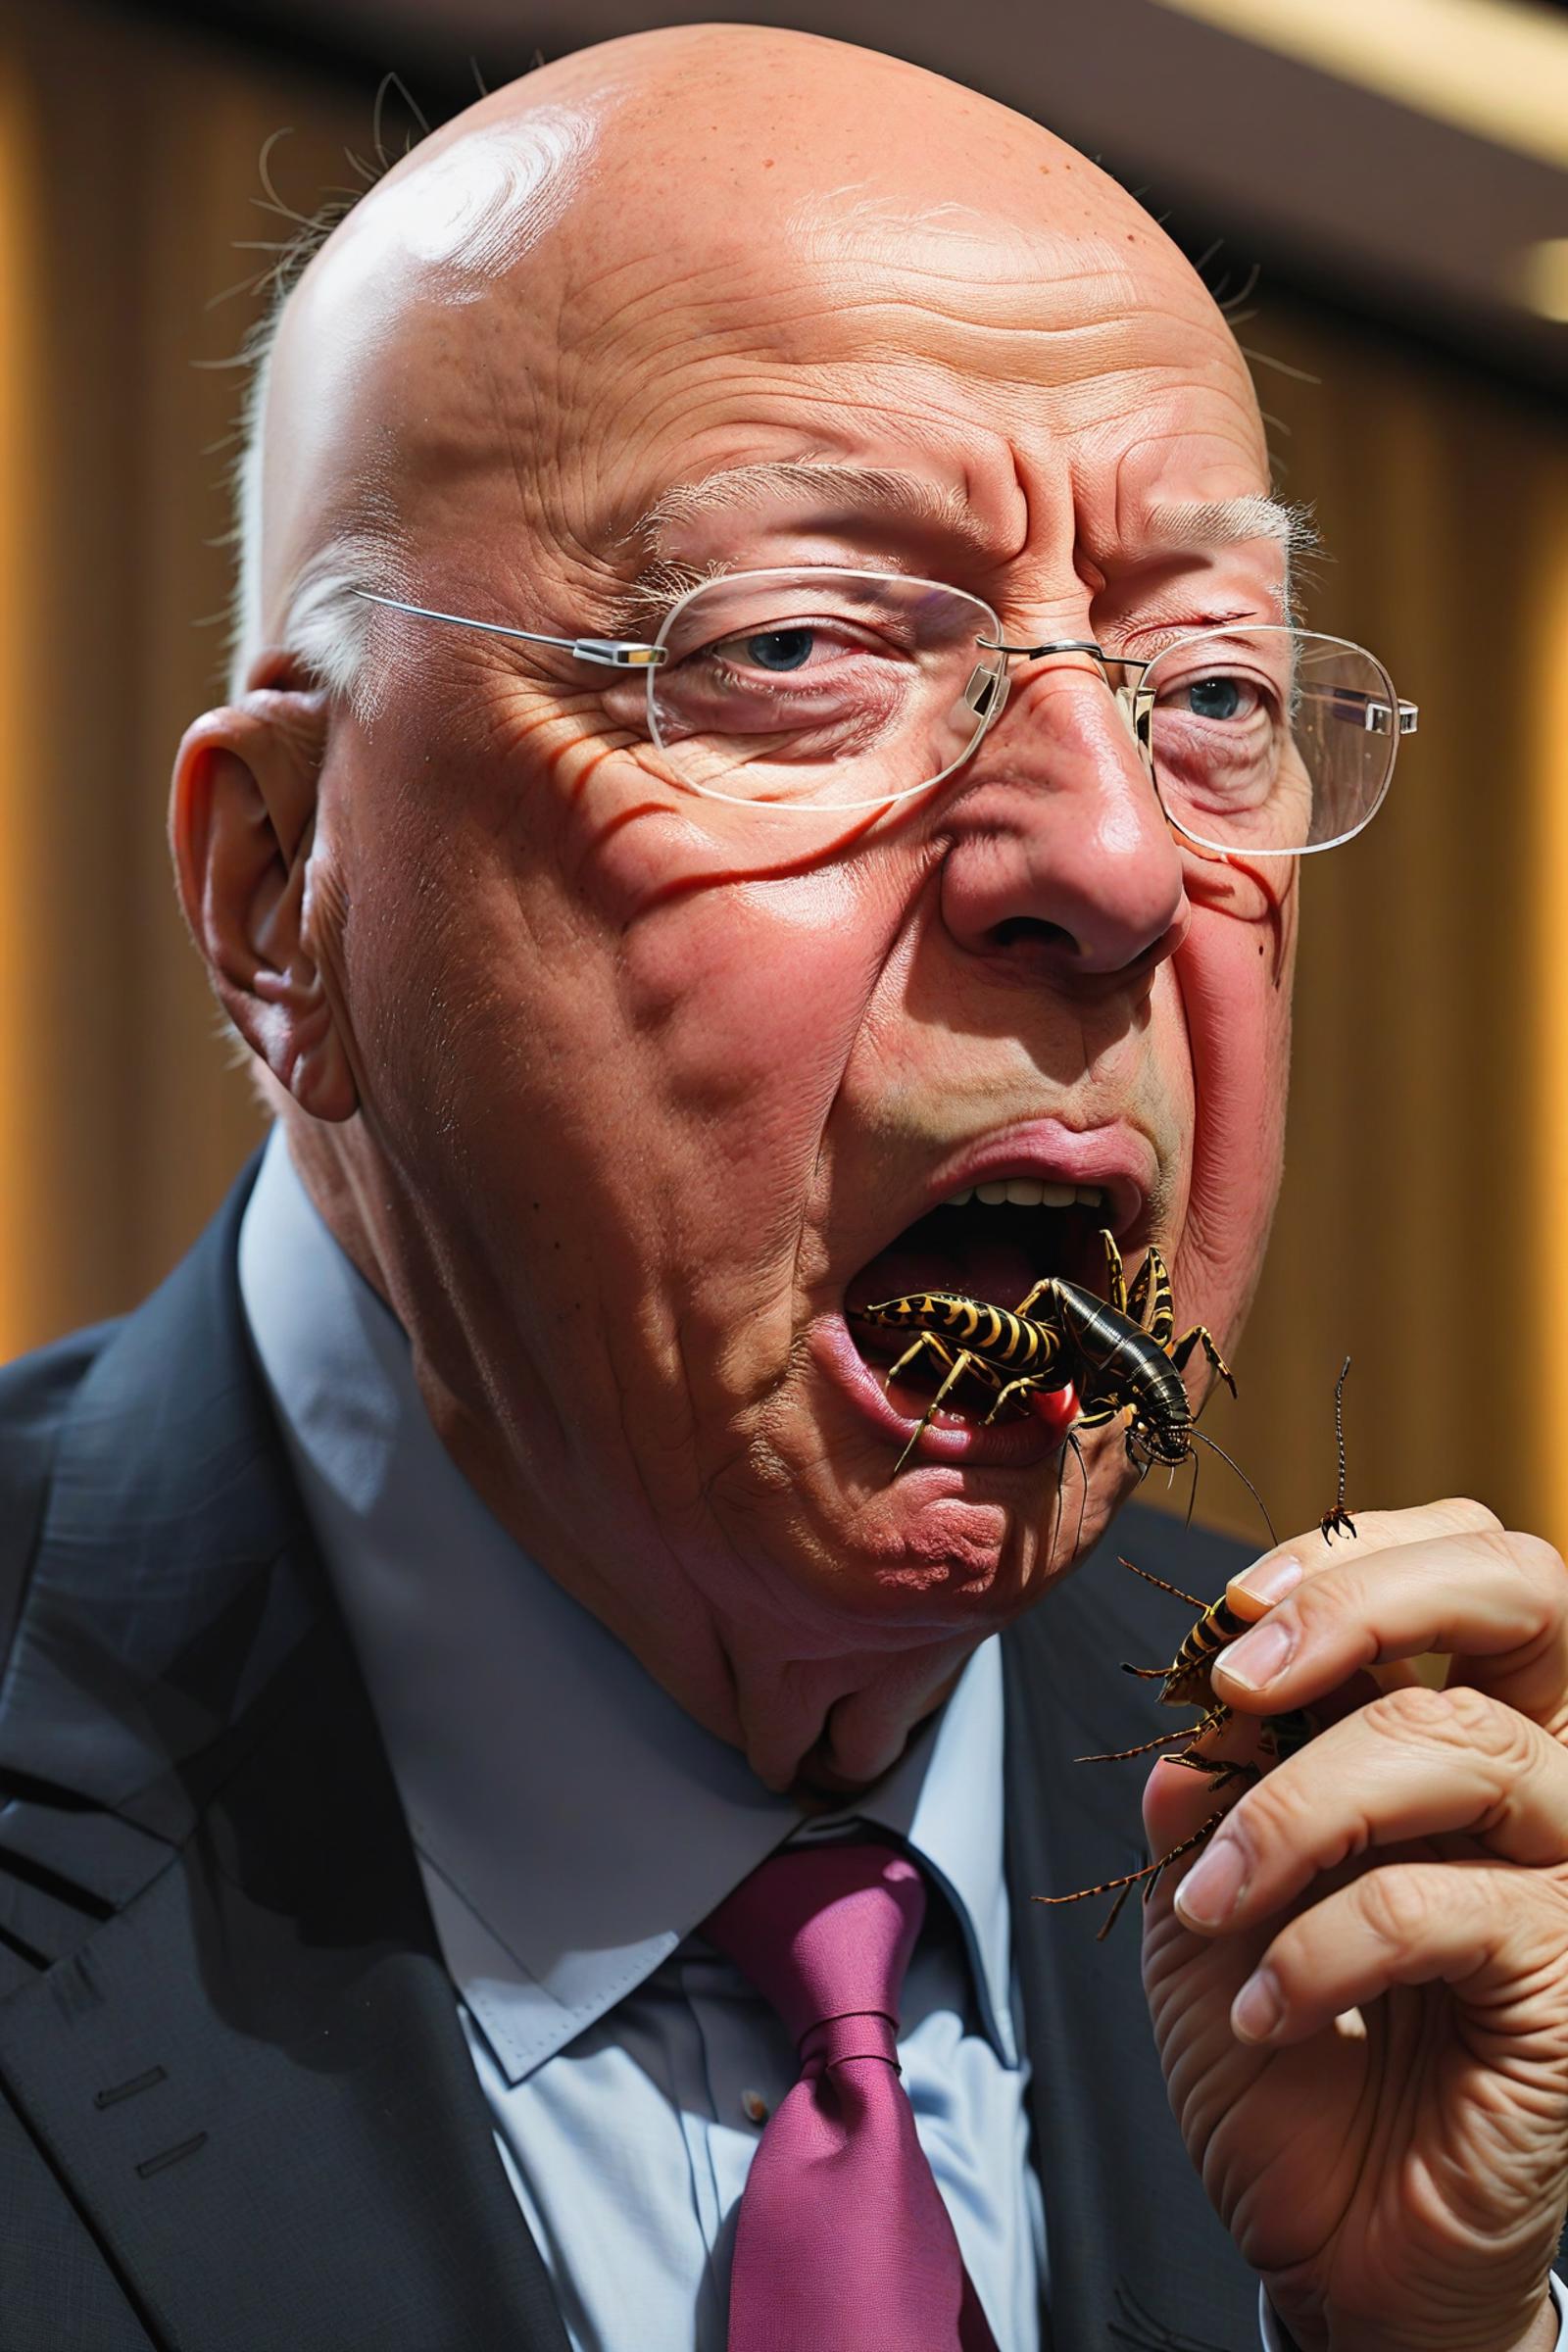 Old Man with Glasses Eating Bugs